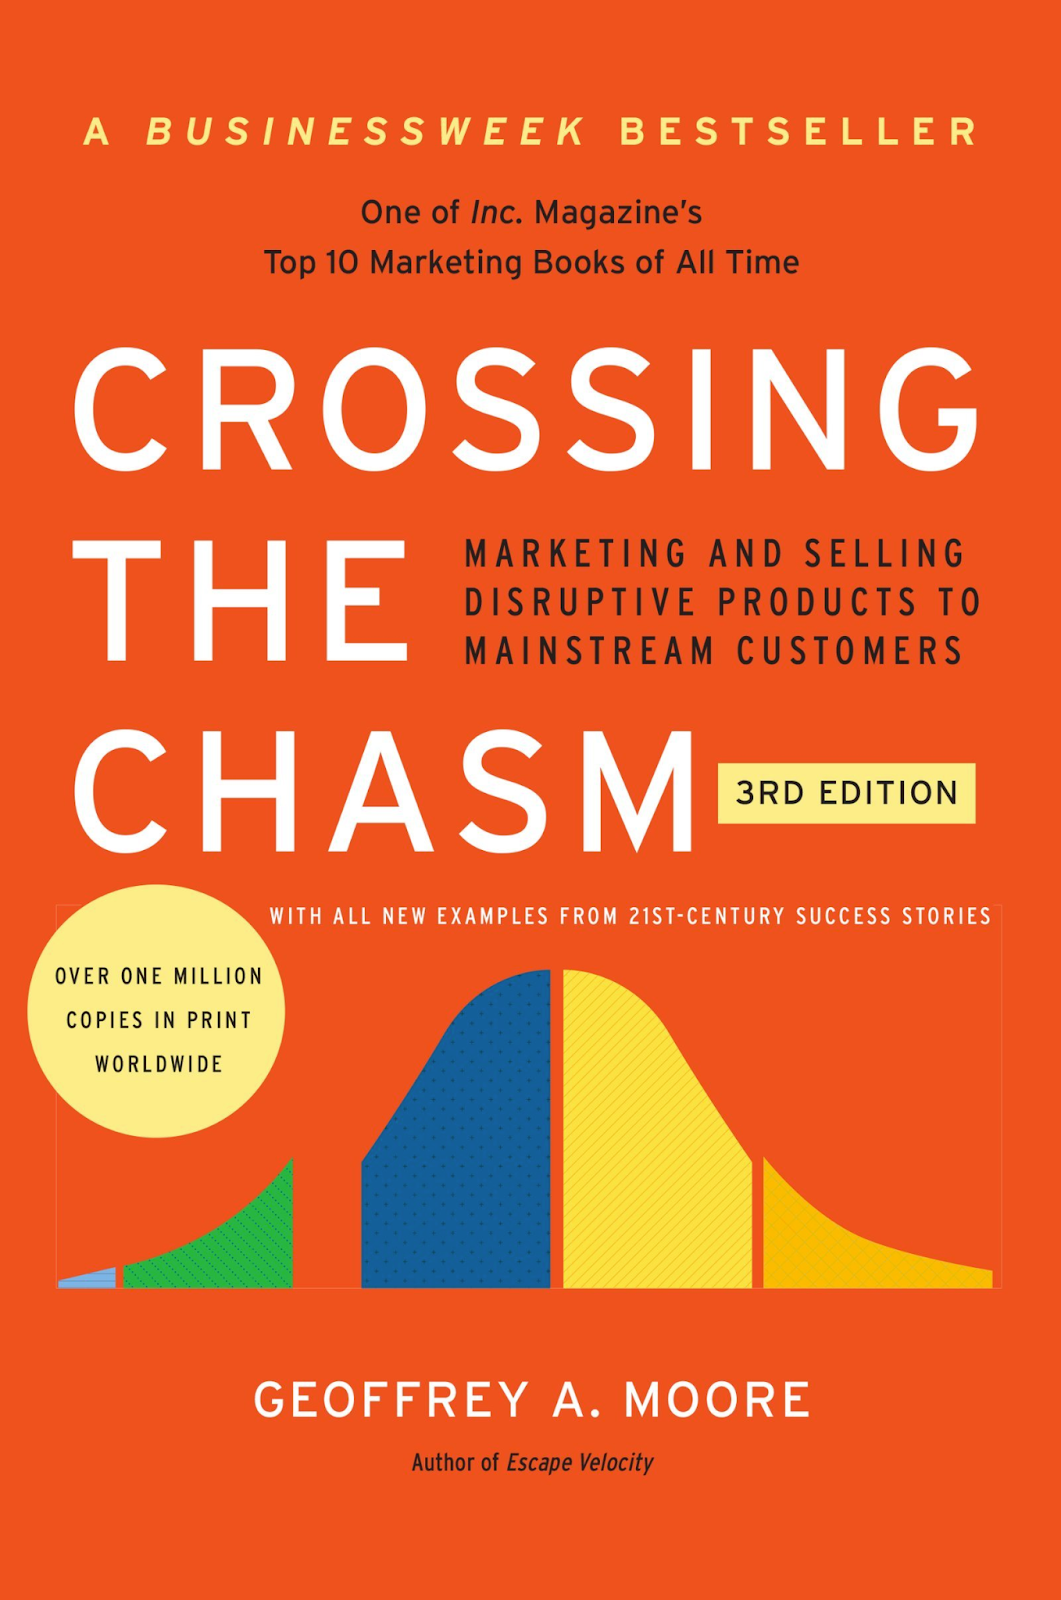  Crossing the Chasm - product management books